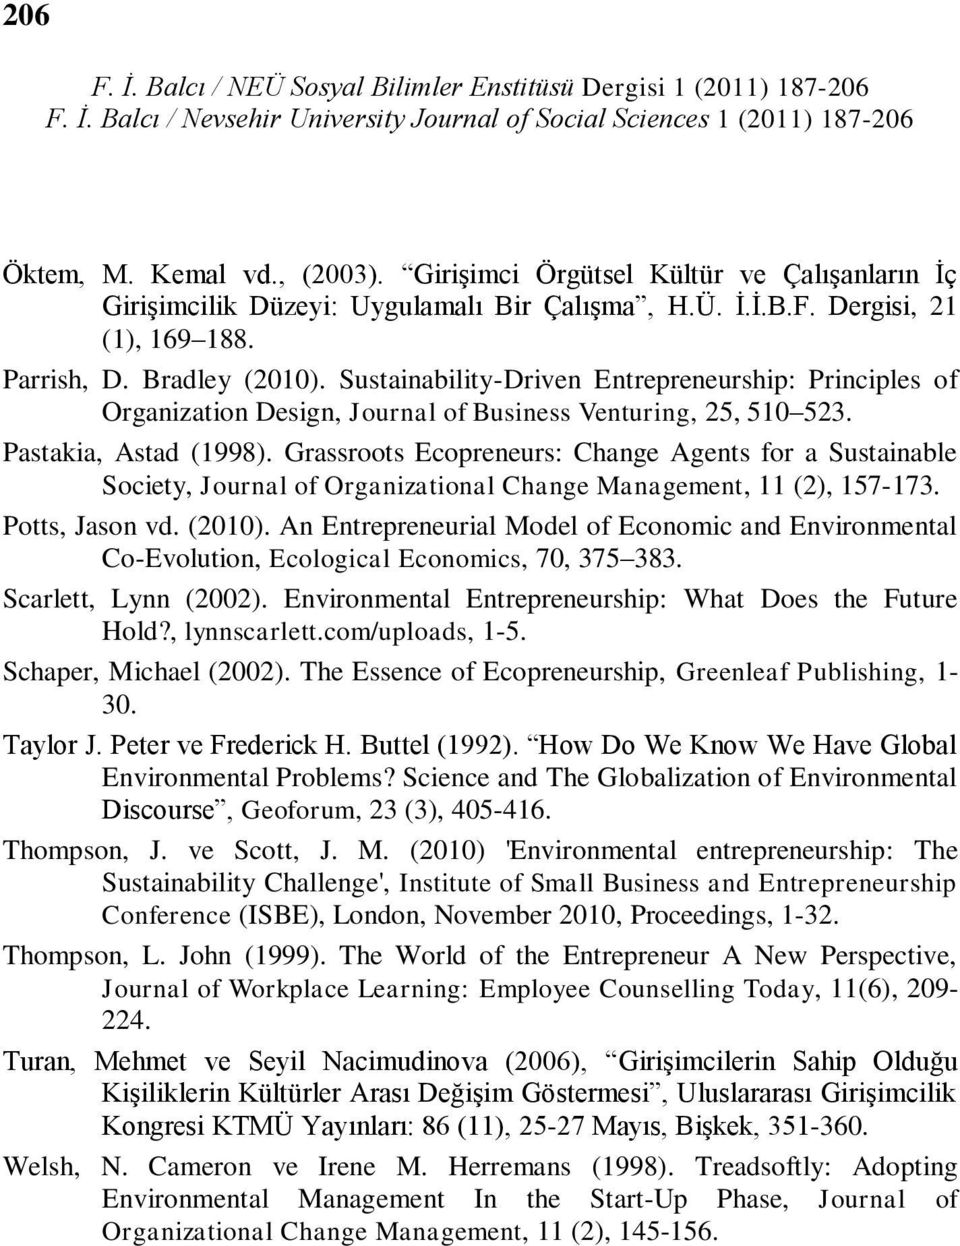 Grassroots Ecopreneurs: Change Agents for a Sustainable Society, Journal of Organizational Change Management, 11 (2), 157-173. Potts, Jason vd. (2010).